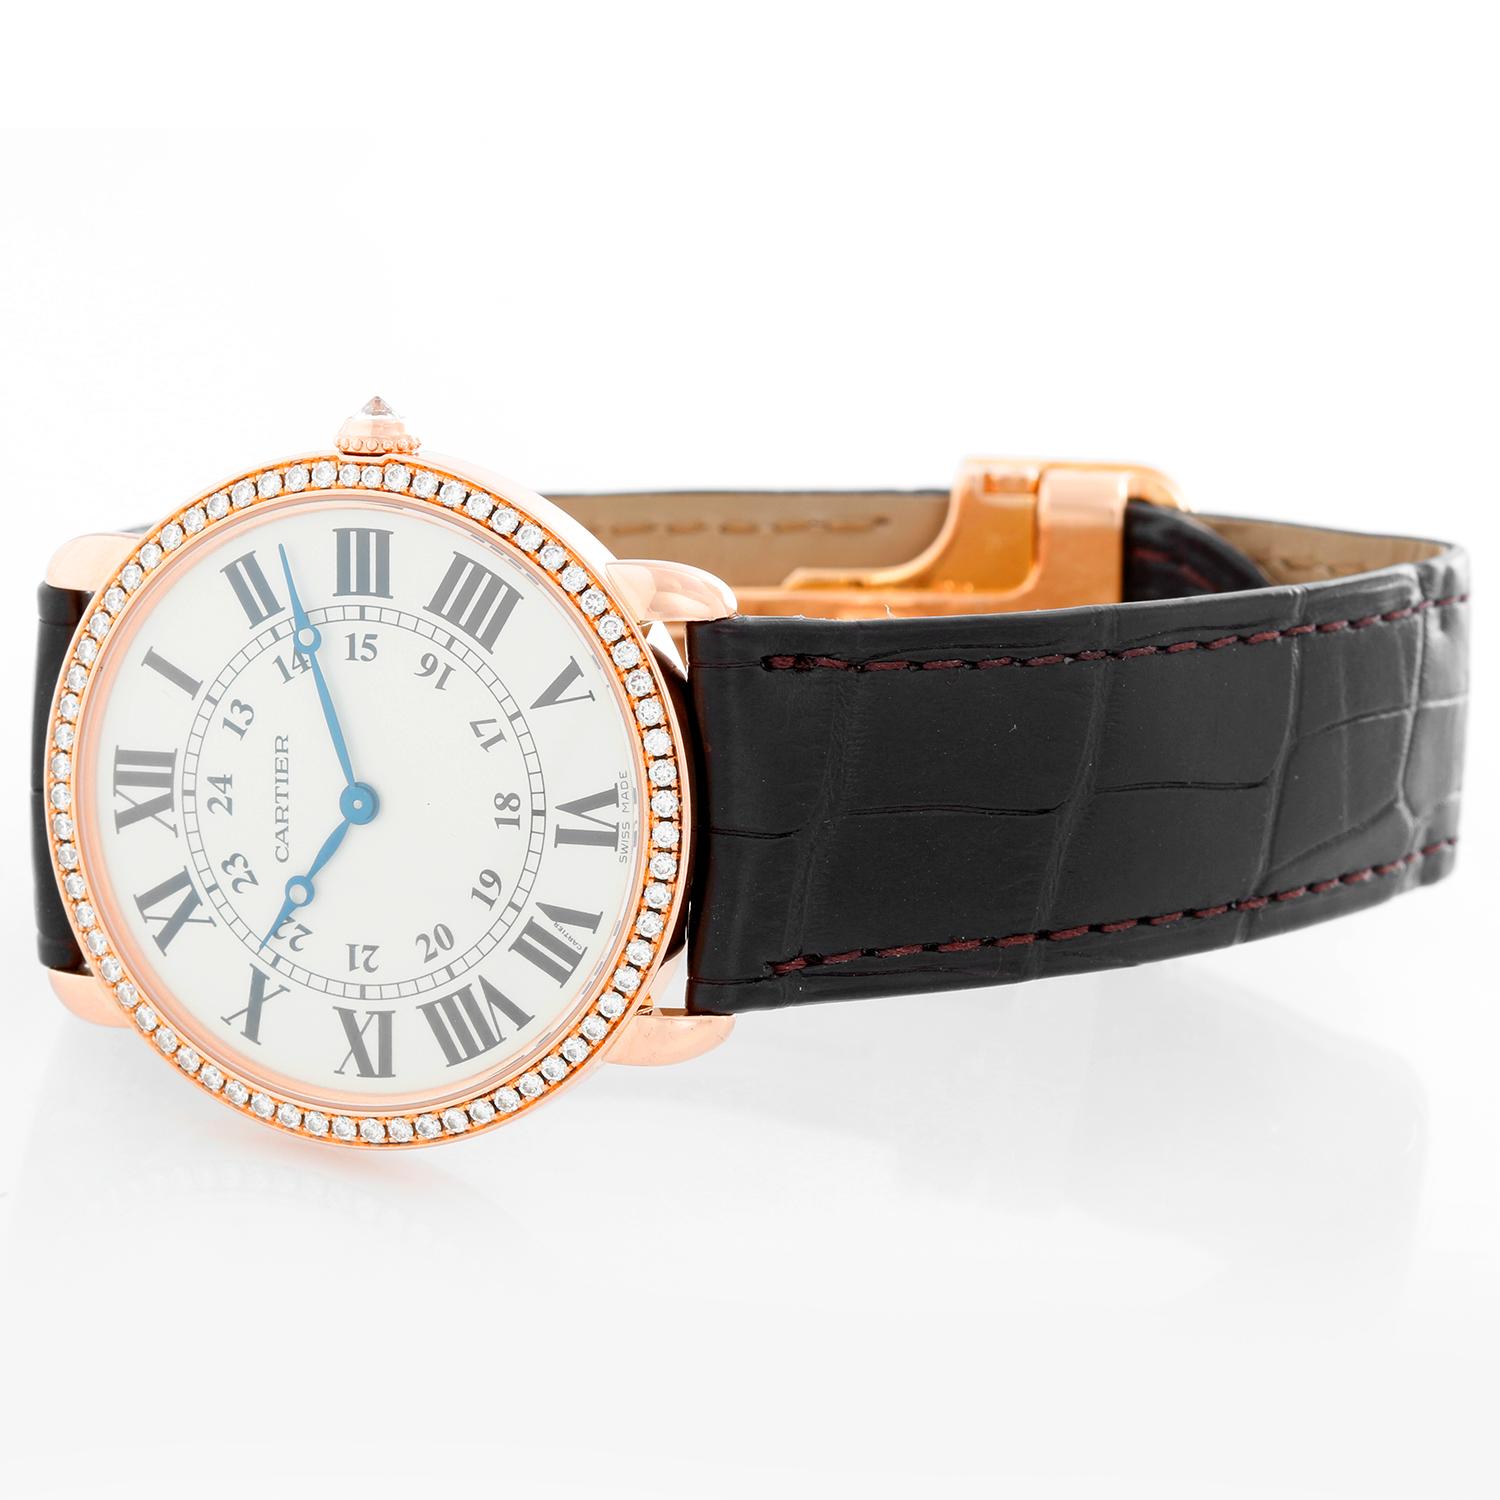 Cartier 18K Rose Gold Ronde Louis Ladies Watch 2889 - Manual winding. 18K Rose Gold case (36 mm) with diamonds . Ivory dial with Roman numerals. Brown alligator strap with 18K Rose Gold deployant clasp. Pre-owned with Cartier box and papers . 